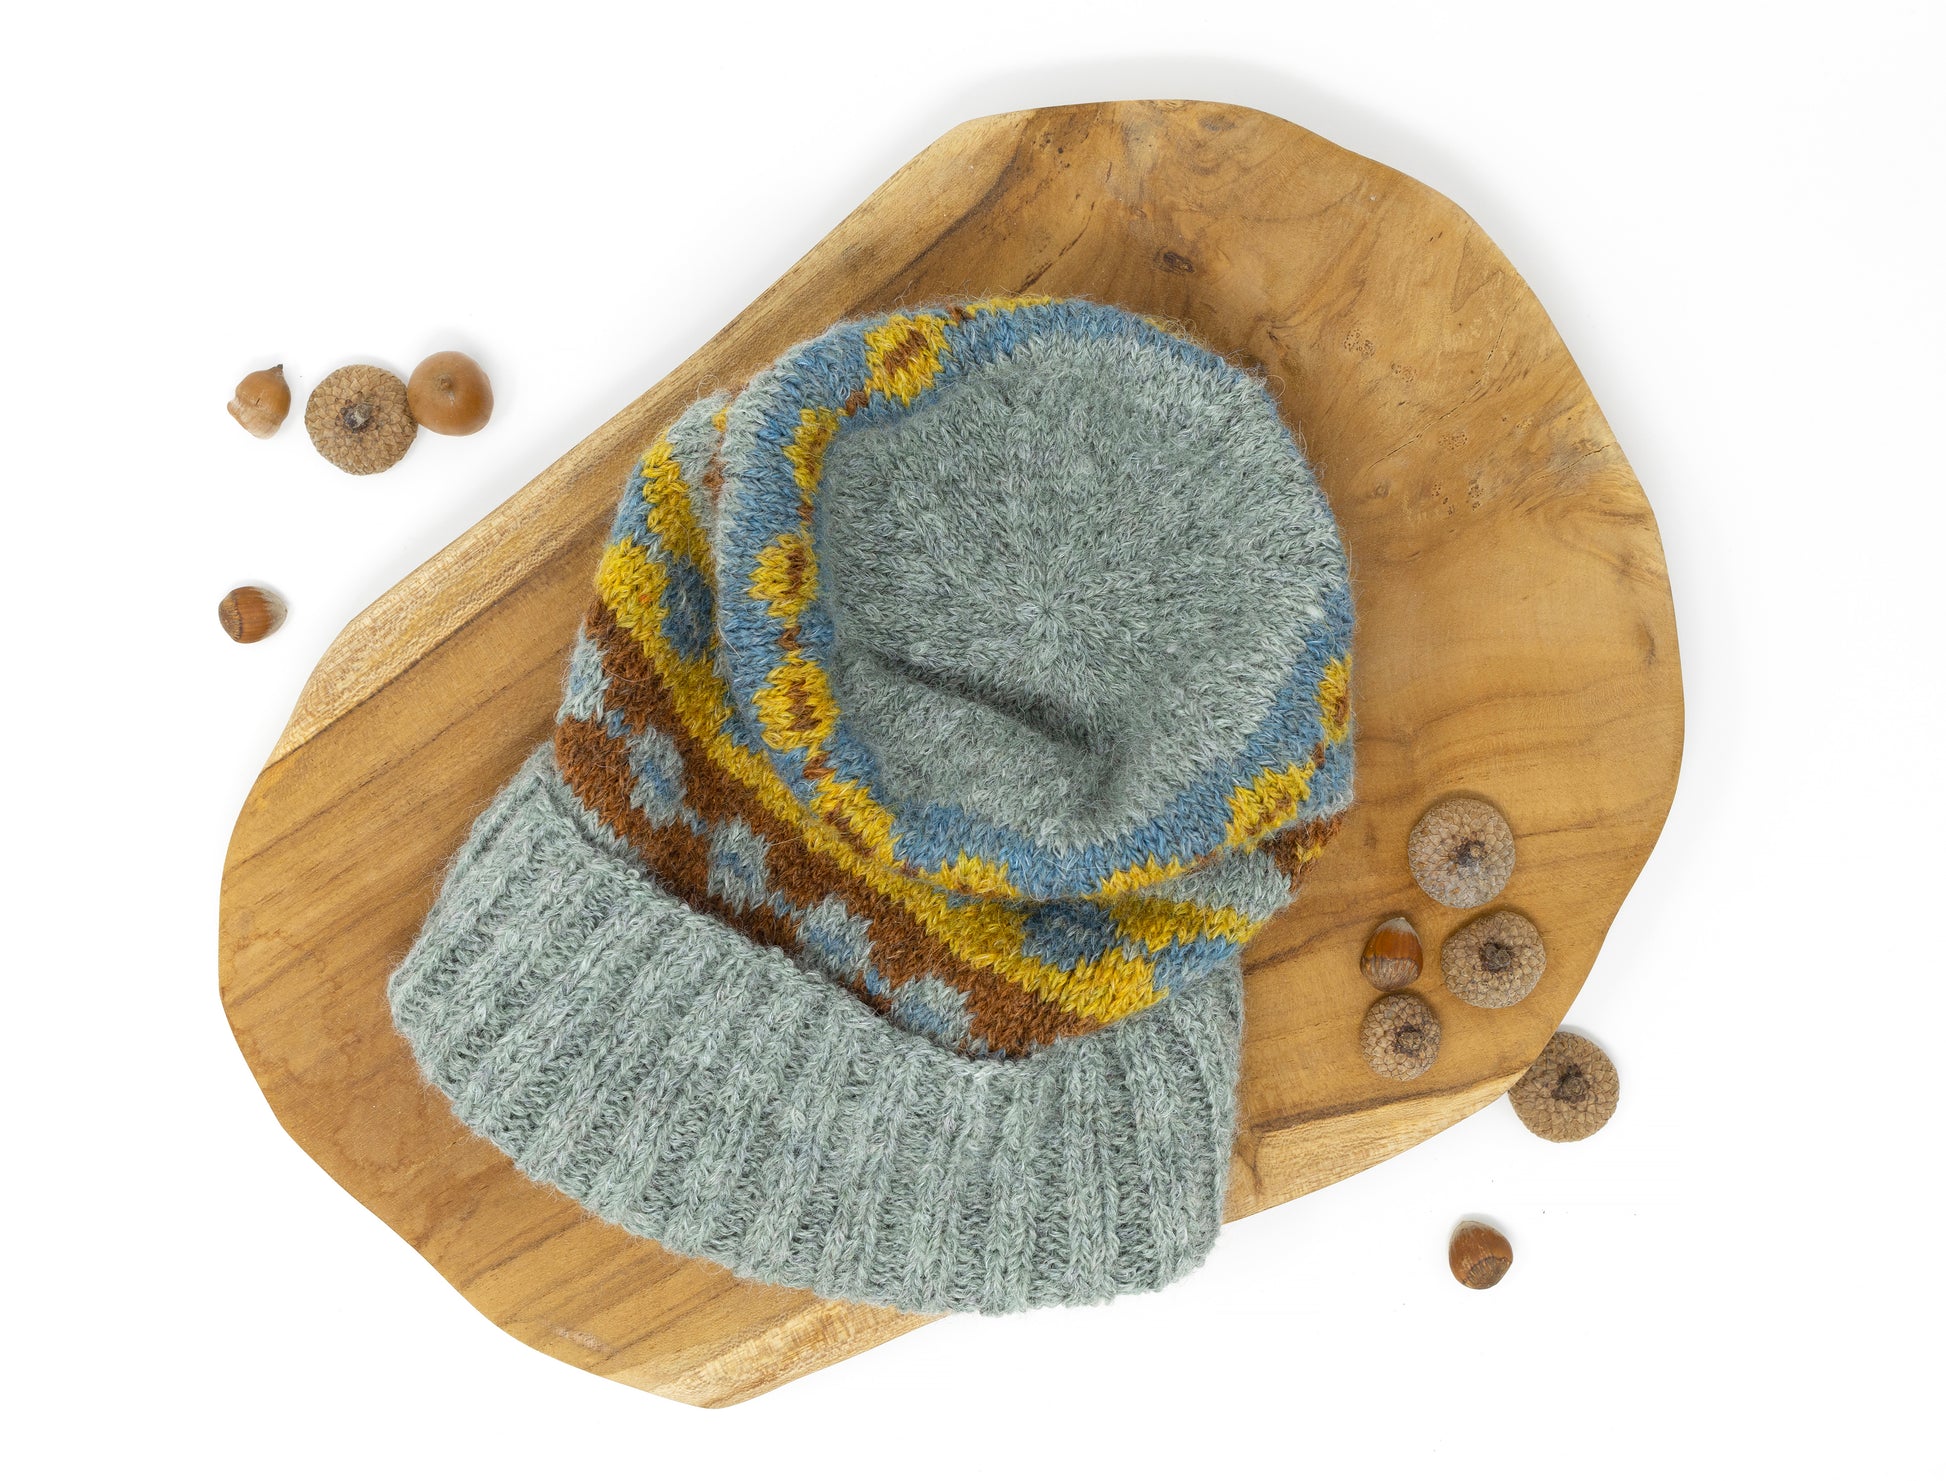 Grey, brown, yellow and blue alpaca wool hand-knitted Fair Isle hat top view